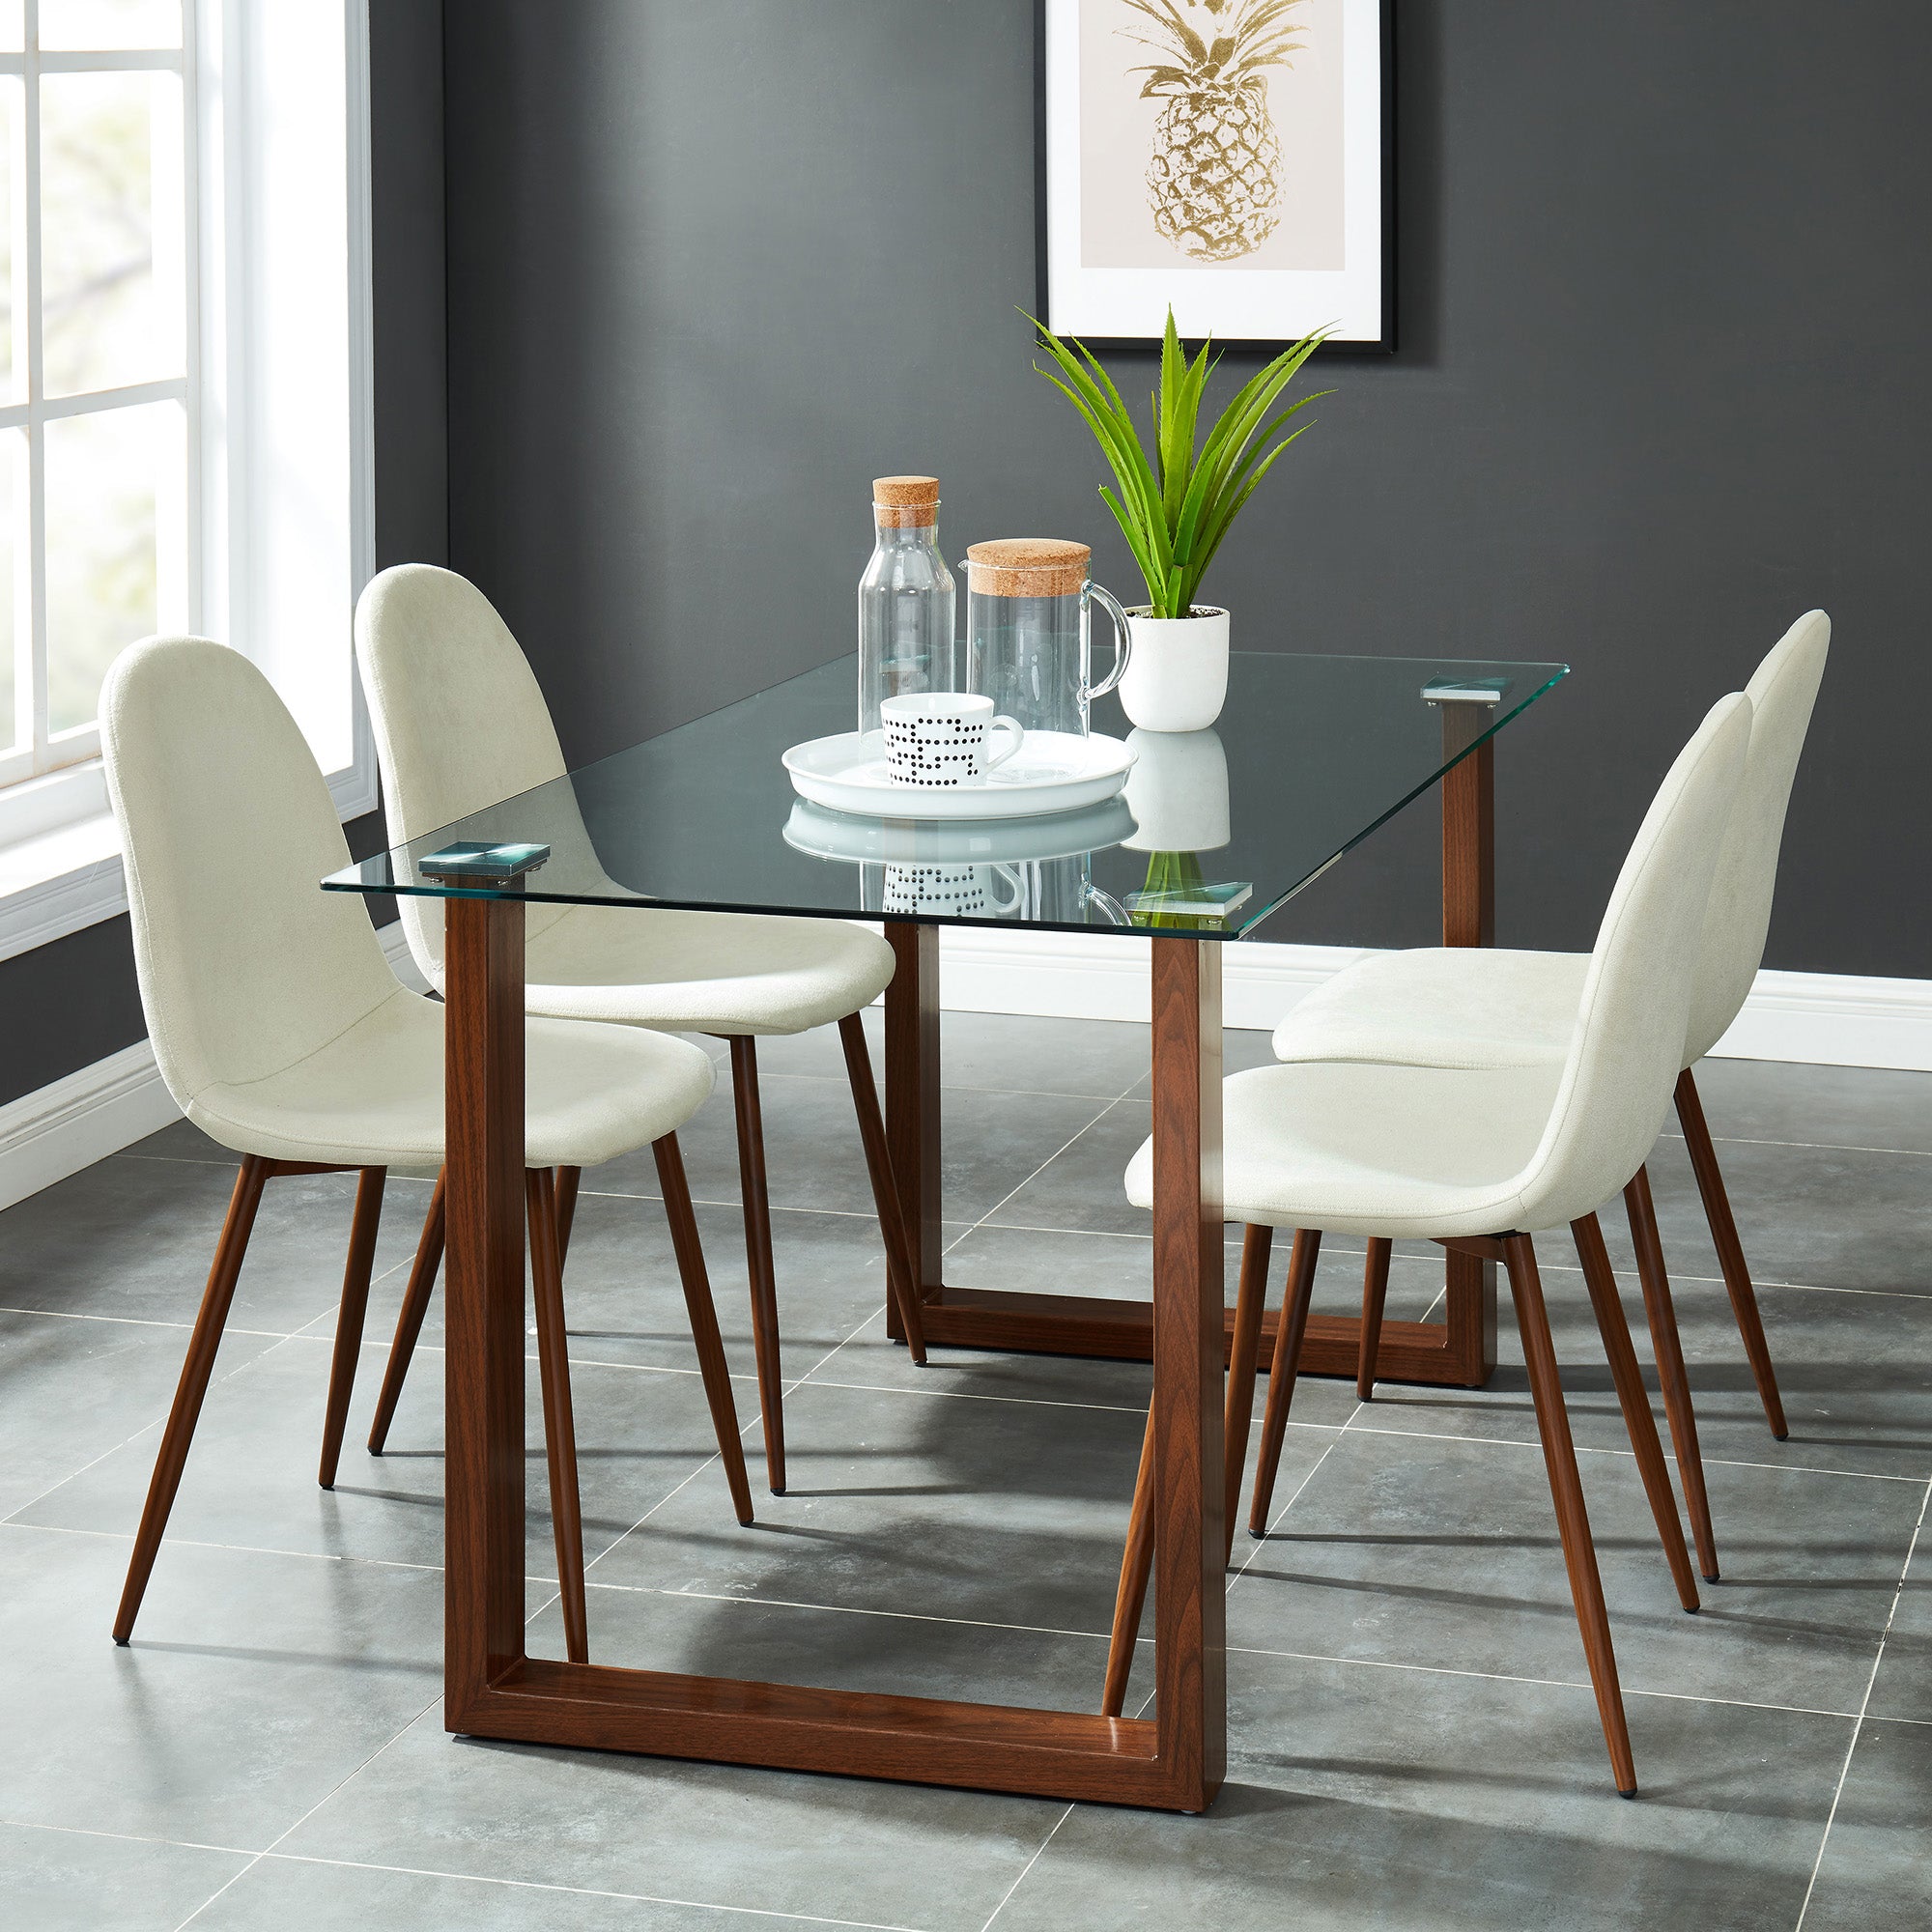 FRANCO 55" WALNUT & GLASS DINING TABLE / LYNA BEIGE CHAIRS - 5PC DINING SET